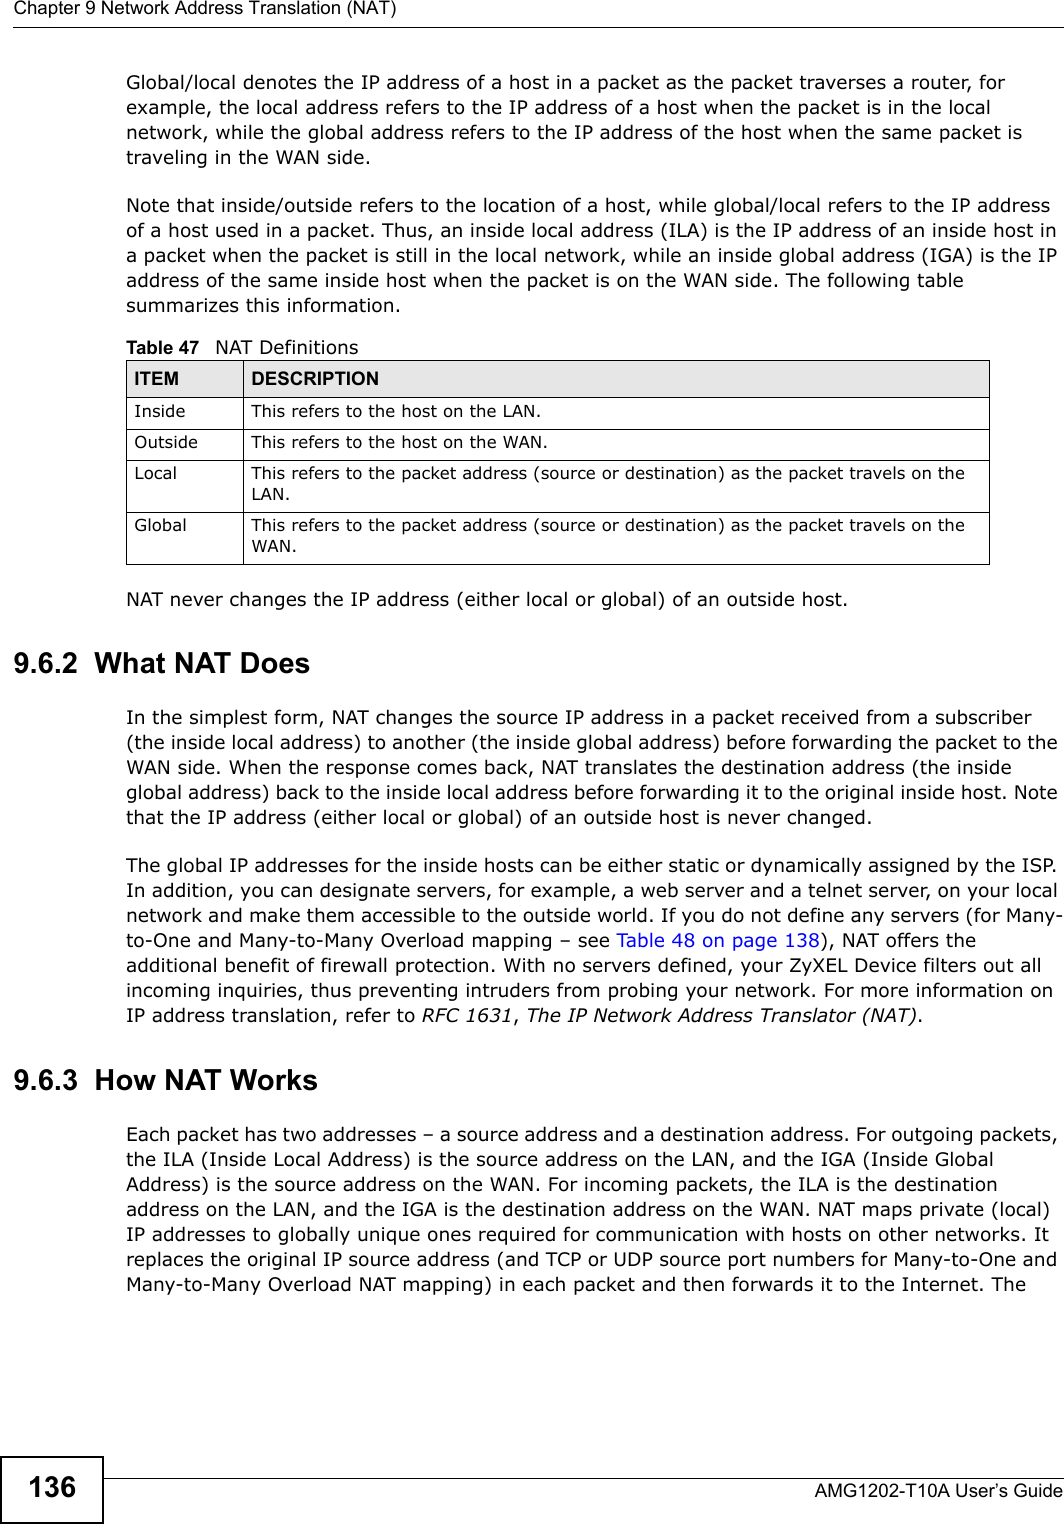 Chapter 9 Network Address Translation (NAT)AMG1202-T10A User’s Guide136Global/local denotes the IP address of a host in a packet as the packet traverses a router, for example, the local address refers to the IP address of a host when the packet is in the local network, while the global address refers to the IP address of the host when the same packet is traveling in the WAN side. Note that inside/outside refers to the location of a host, while global/local refers to the IP address of a host used in a packet. Thus, an inside local address (ILA) is the IP address of an inside host in a packet when the packet is still in the local network, while an inside global address (IGA) is the IP address of the same inside host when the packet is on the WAN side. The following table summarizes this information.NAT never changes the IP address (either local or global) of an outside host.9.6.2  What NAT DoesIn the simplest form, NAT changes the source IP address in a packet received from a subscriber (the inside local address) to another (the inside global address) before forwarding the packet to the WAN side. When the response comes back, NAT translates the destination address (the inside global address) back to the inside local address before forwarding it to the original inside host. Note that the IP address (either local or global) of an outside host is never changed.The global IP addresses for the inside hosts can be either static or dynamically assigned by the ISP. In addition, you can designate servers, for example, a web server and a telnet server, on your local network and make them accessible to the outside world. If you do not define any servers (for Many-to-One and Many-to-Many Overload mapping – see Table 48 on page 138), NAT offers the additional benefit of firewall protection. With no servers defined, your ZyXEL Device filters out all incoming inquiries, thus preventing intruders from probing your network. For more information on IP address translation, refer to RFC 1631, The IP Network Address Translator (NAT).9.6.3  How NAT WorksEach packet has two addresses – a source address and a destination address. For outgoing packets, the ILA (Inside Local Address) is the source address on the LAN, and the IGA (Inside Global Address) is the source address on the WAN. For incoming packets, the ILA is the destination address on the LAN, and the IGA is the destination address on the WAN. NAT maps private (local) IP addresses to globally unique ones required for communication with hosts on other networks. It replaces the original IP source address (and TCP or UDP source port numbers for Many-to-One and Many-to-Many Overload NAT mapping) in each packet and then forwards it to the Internet. The Table 47   NAT DefinitionsITEM DESCRIPTIONInside This refers to the host on the LAN.Outside This refers to the host on the WAN.Local This refers to the packet address (source or destination) as the packet travels on the LAN.Global This refers to the packet address (source or destination) as the packet travels on the WAN.